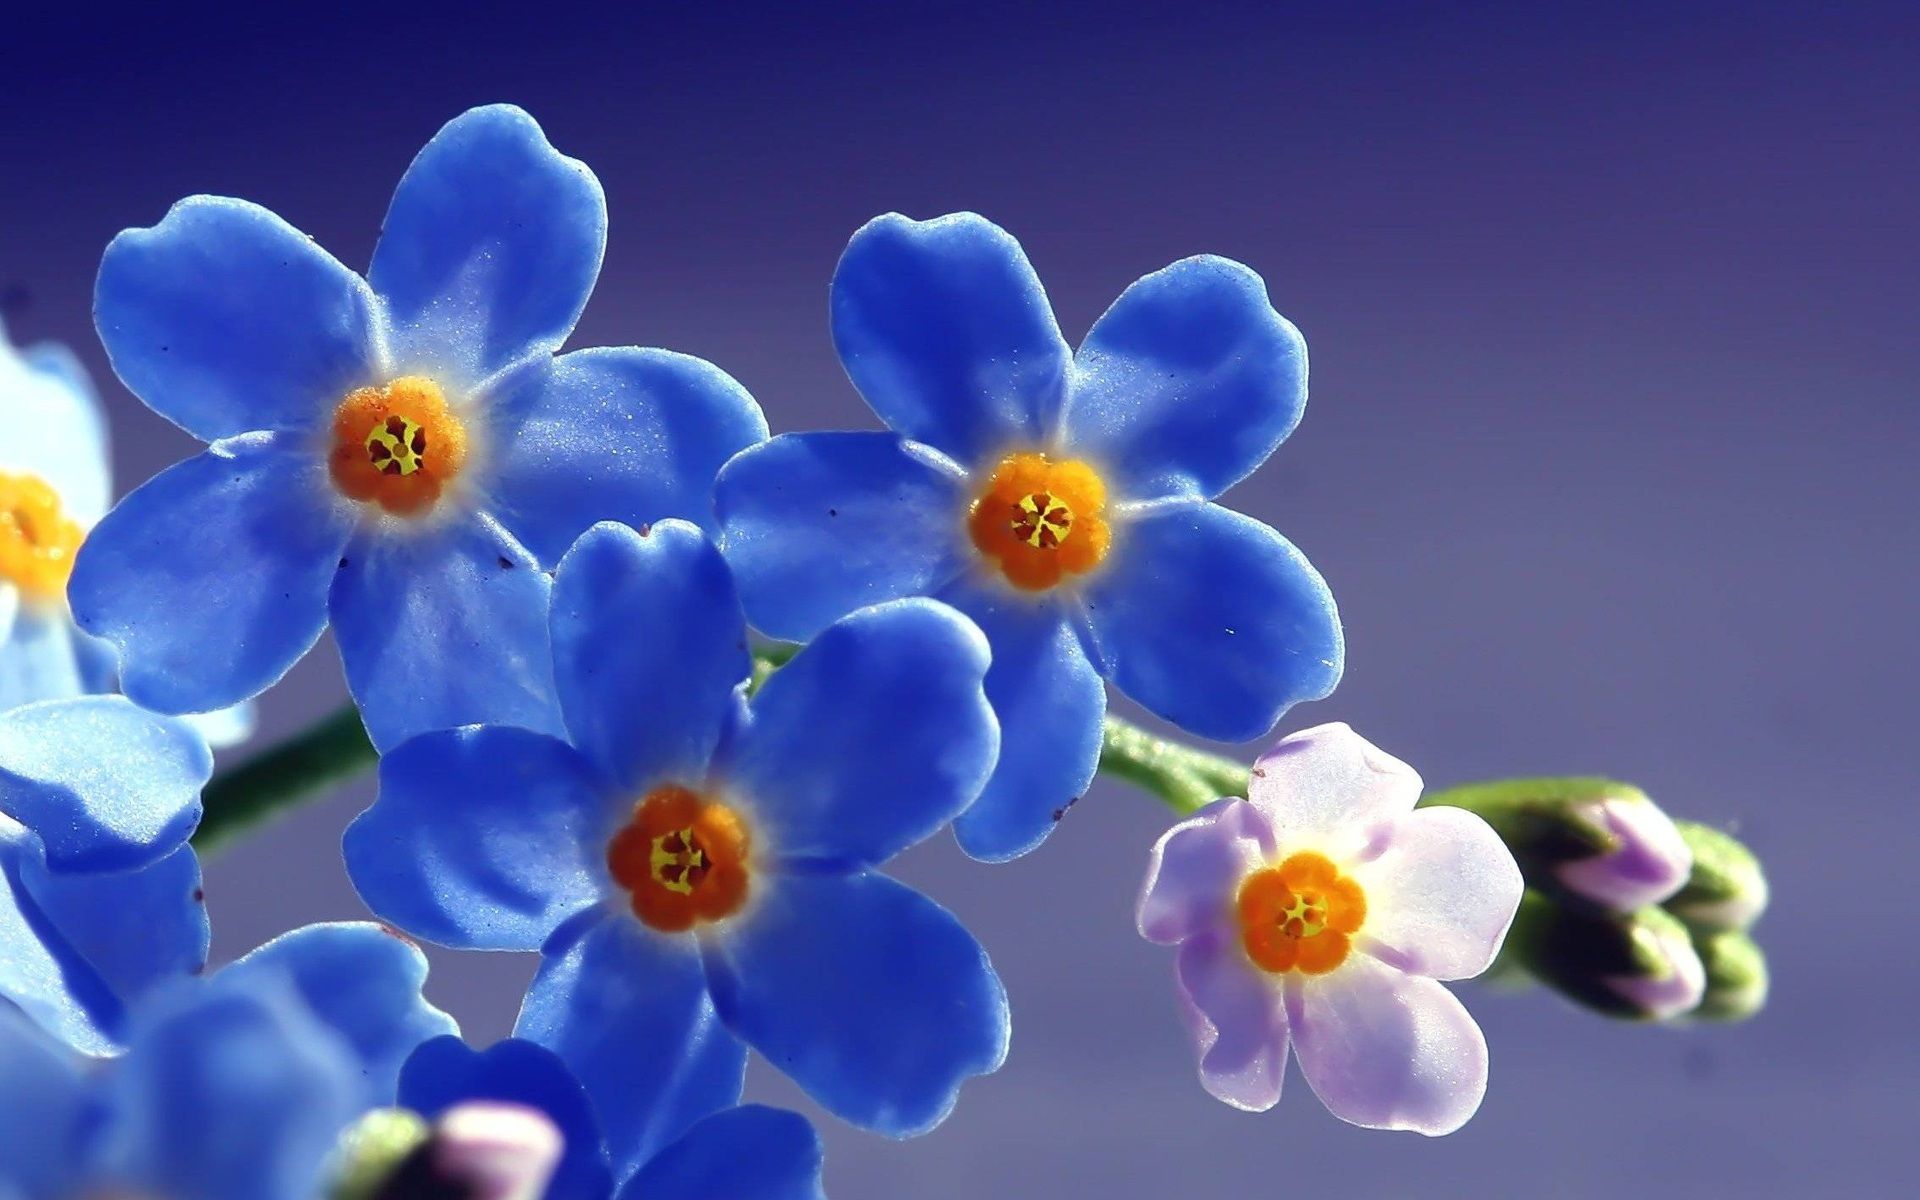 Blue flowers image as a beautiful computer wallpaper